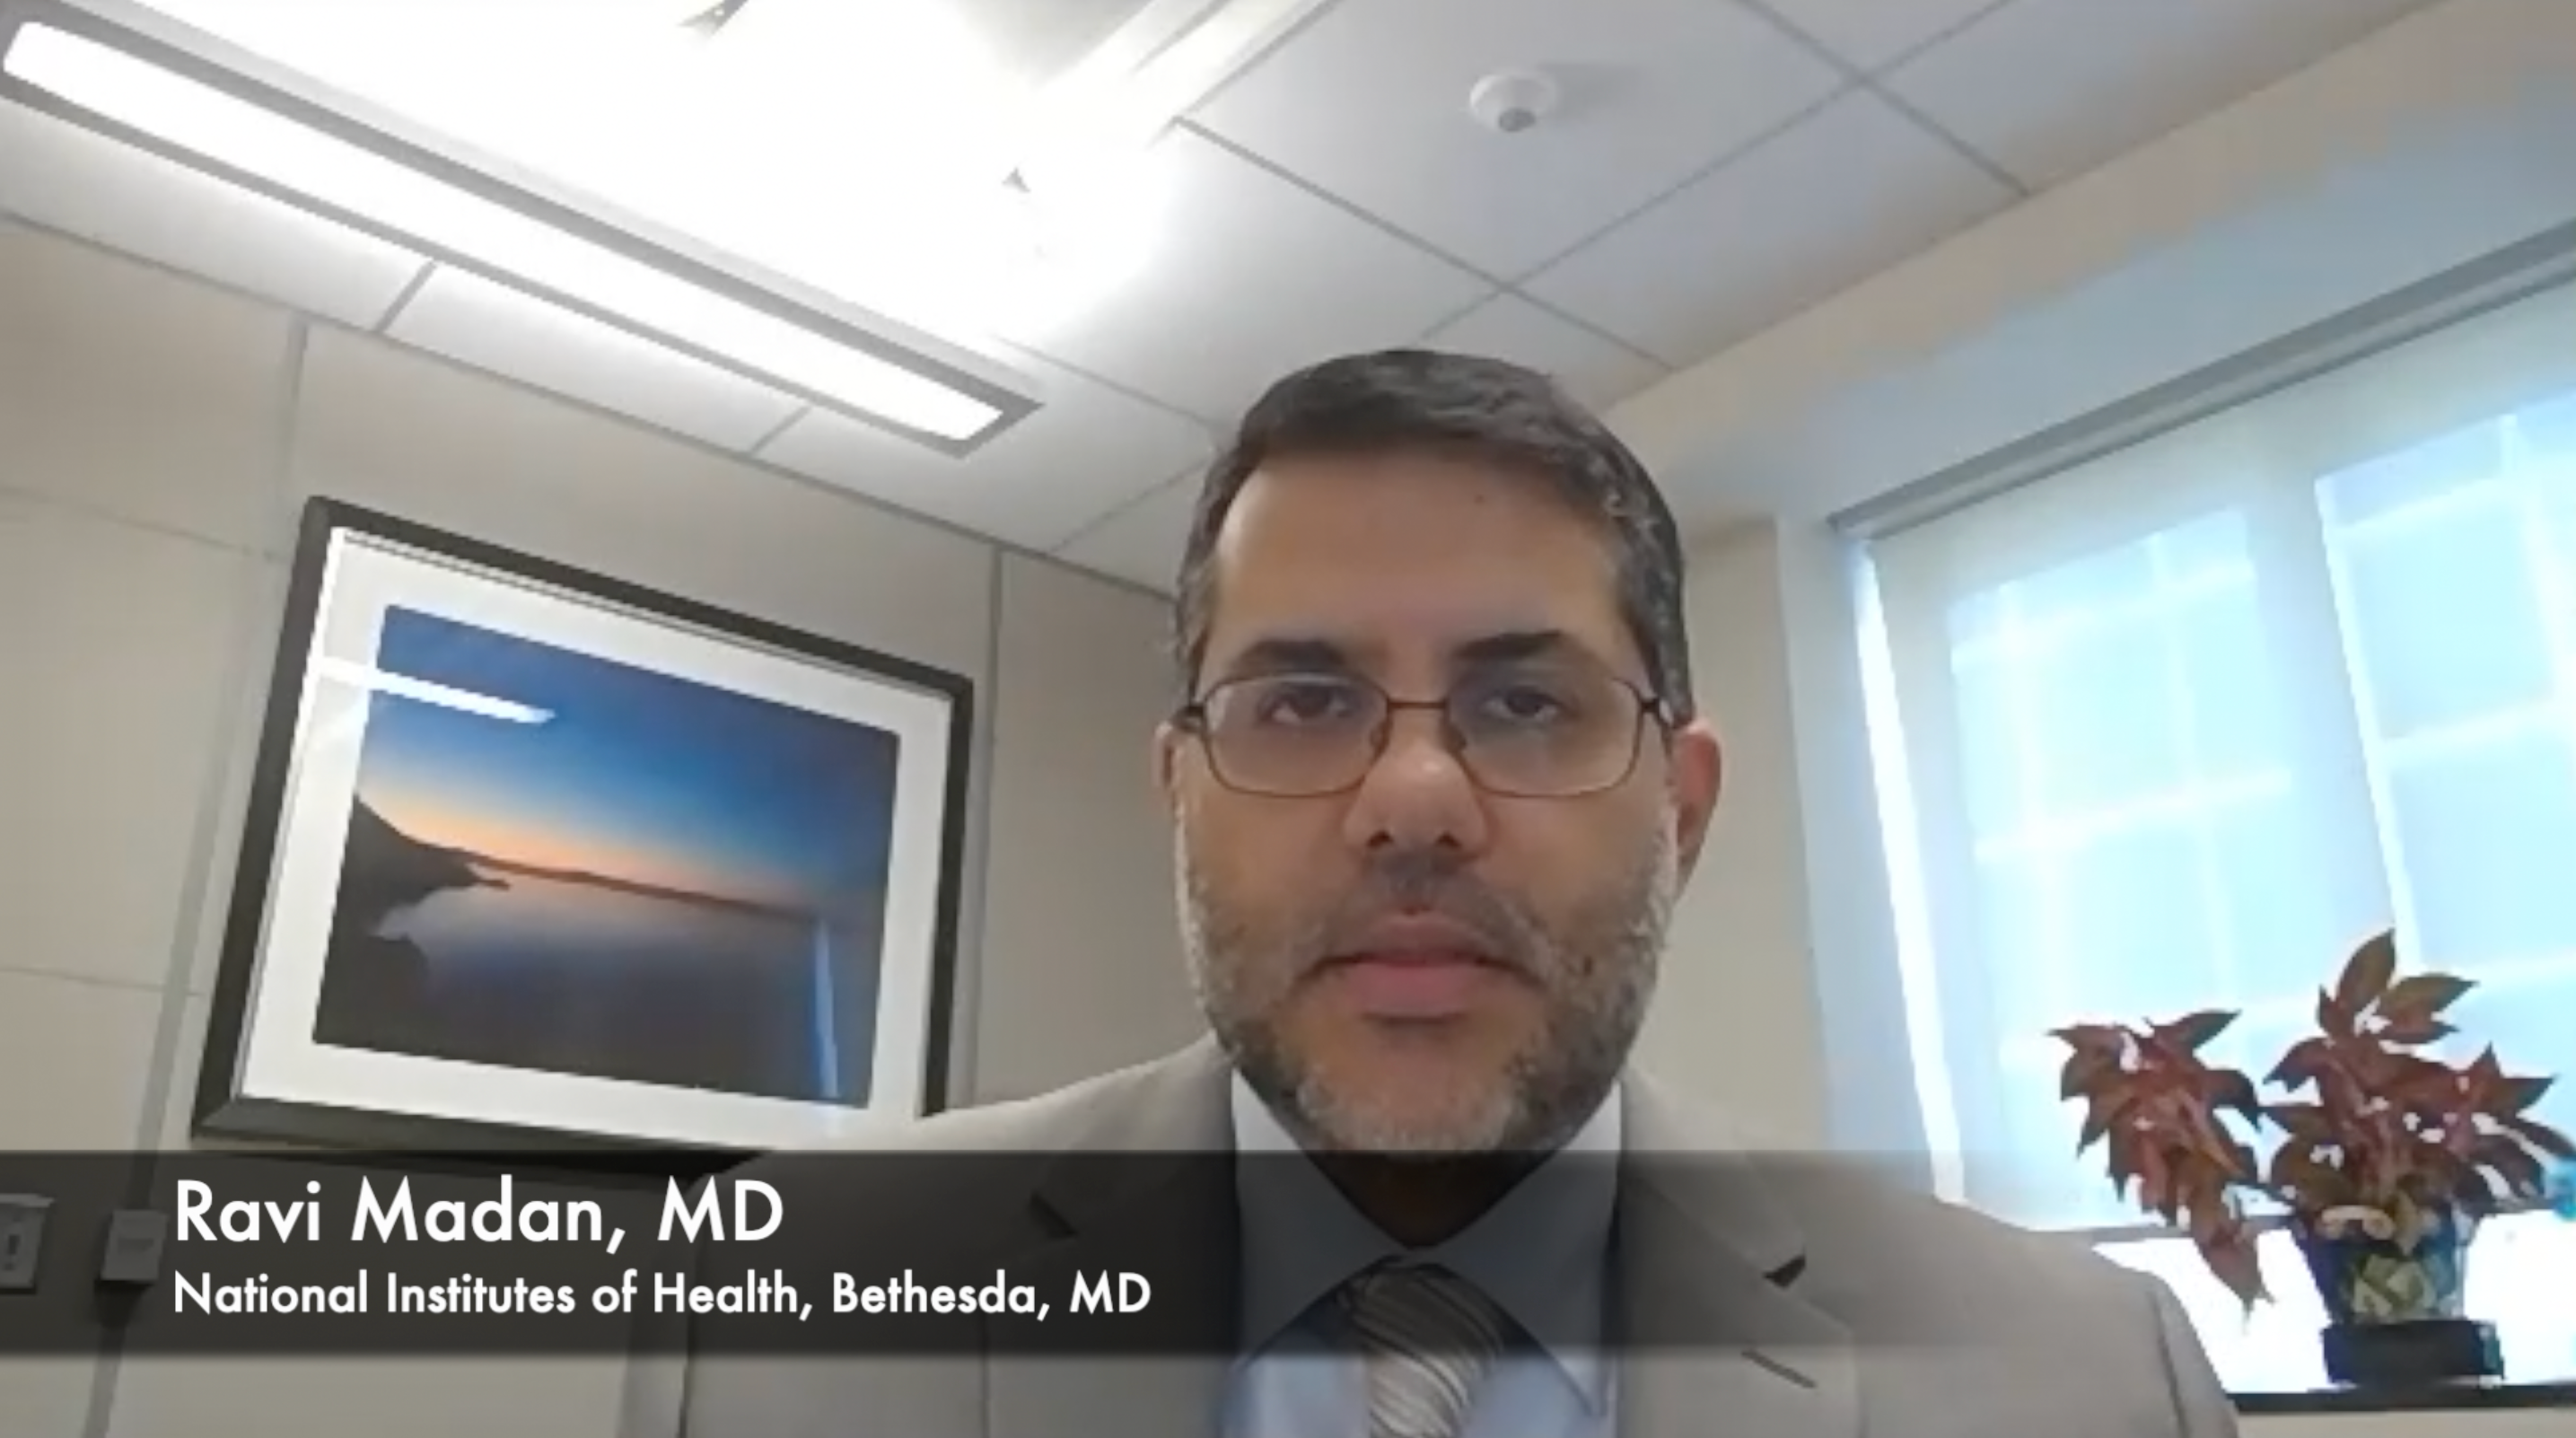 Ravi Madan, MD, discusses clinical findings utilizing PET imaging and Tc99 scans in patients with metastatic castration-resistant prostate cancer who are being treated with enzalutamide